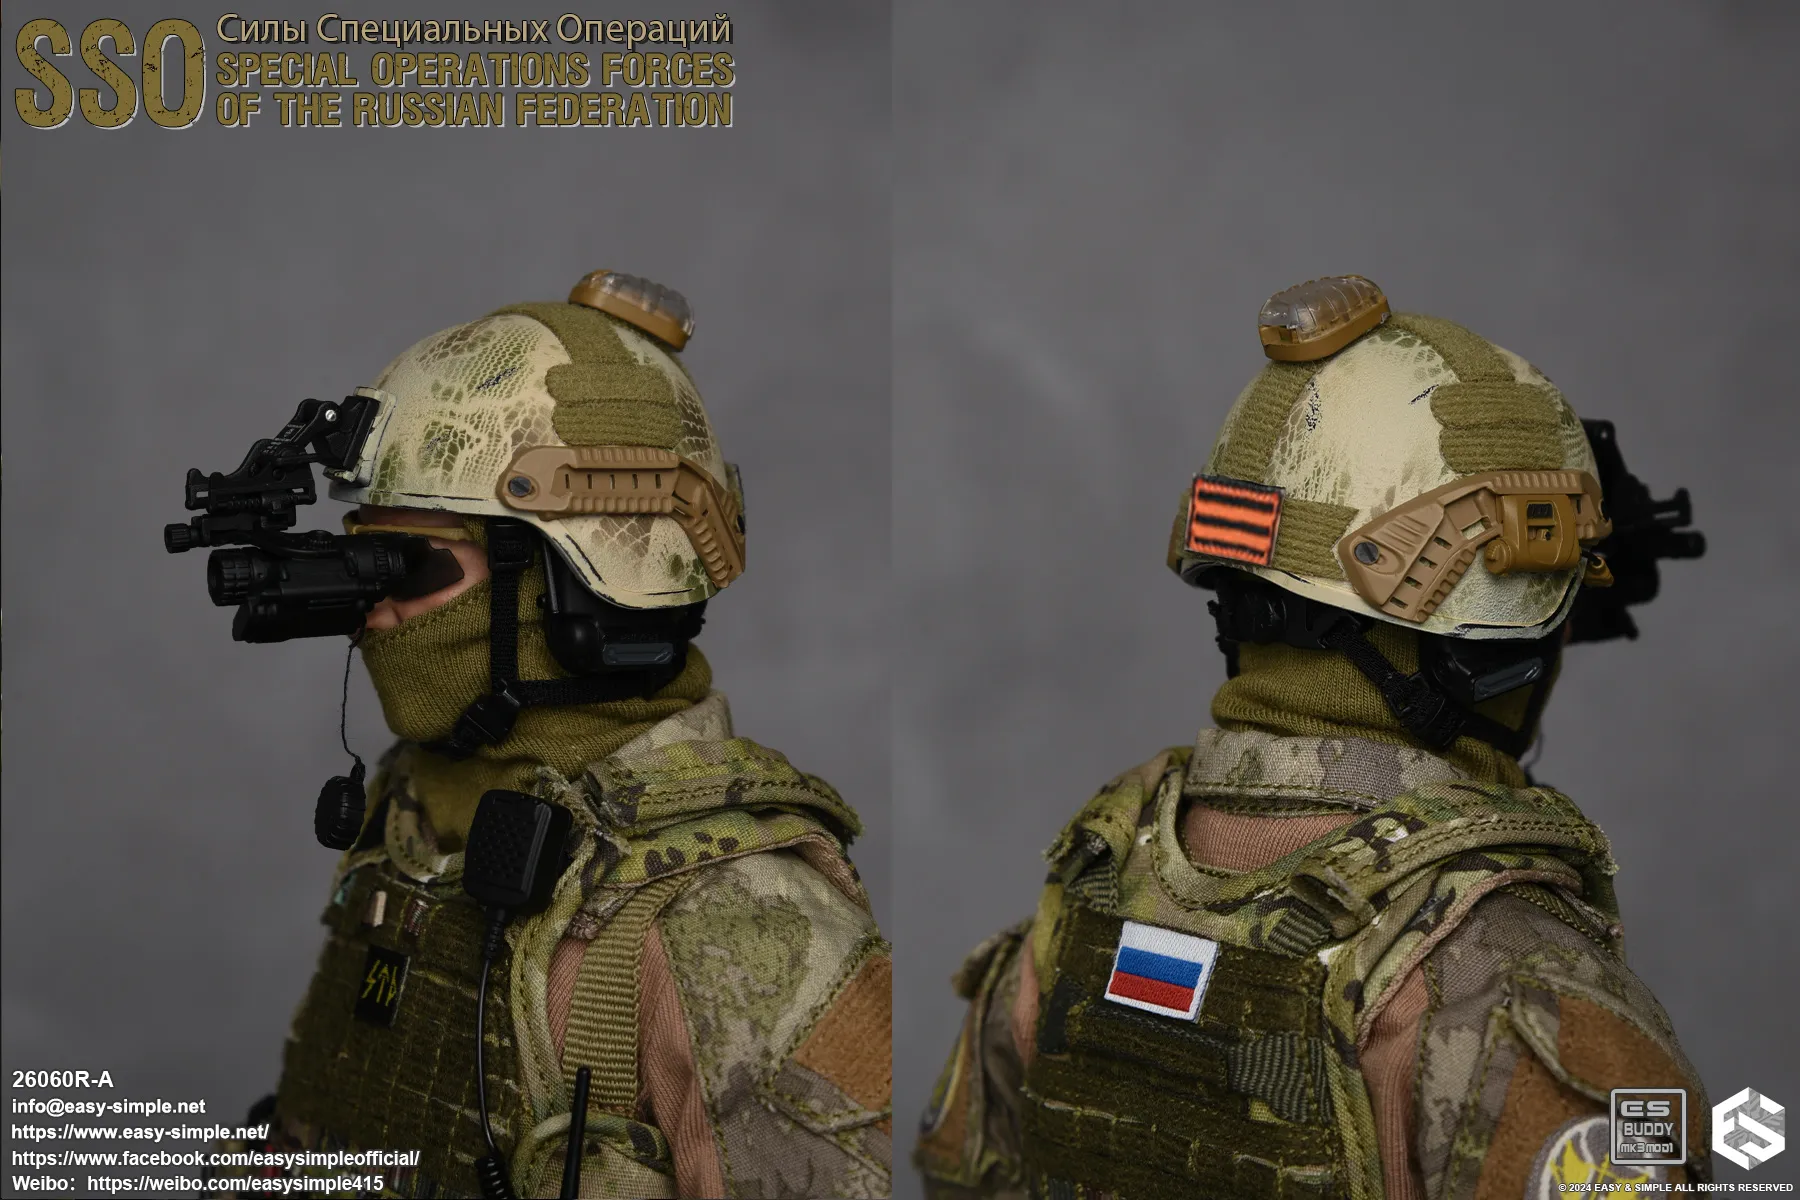 NEW PRODUCT: Easy&Simple 26060R-A Russian Special Operations Forces (SSO) Format,webp